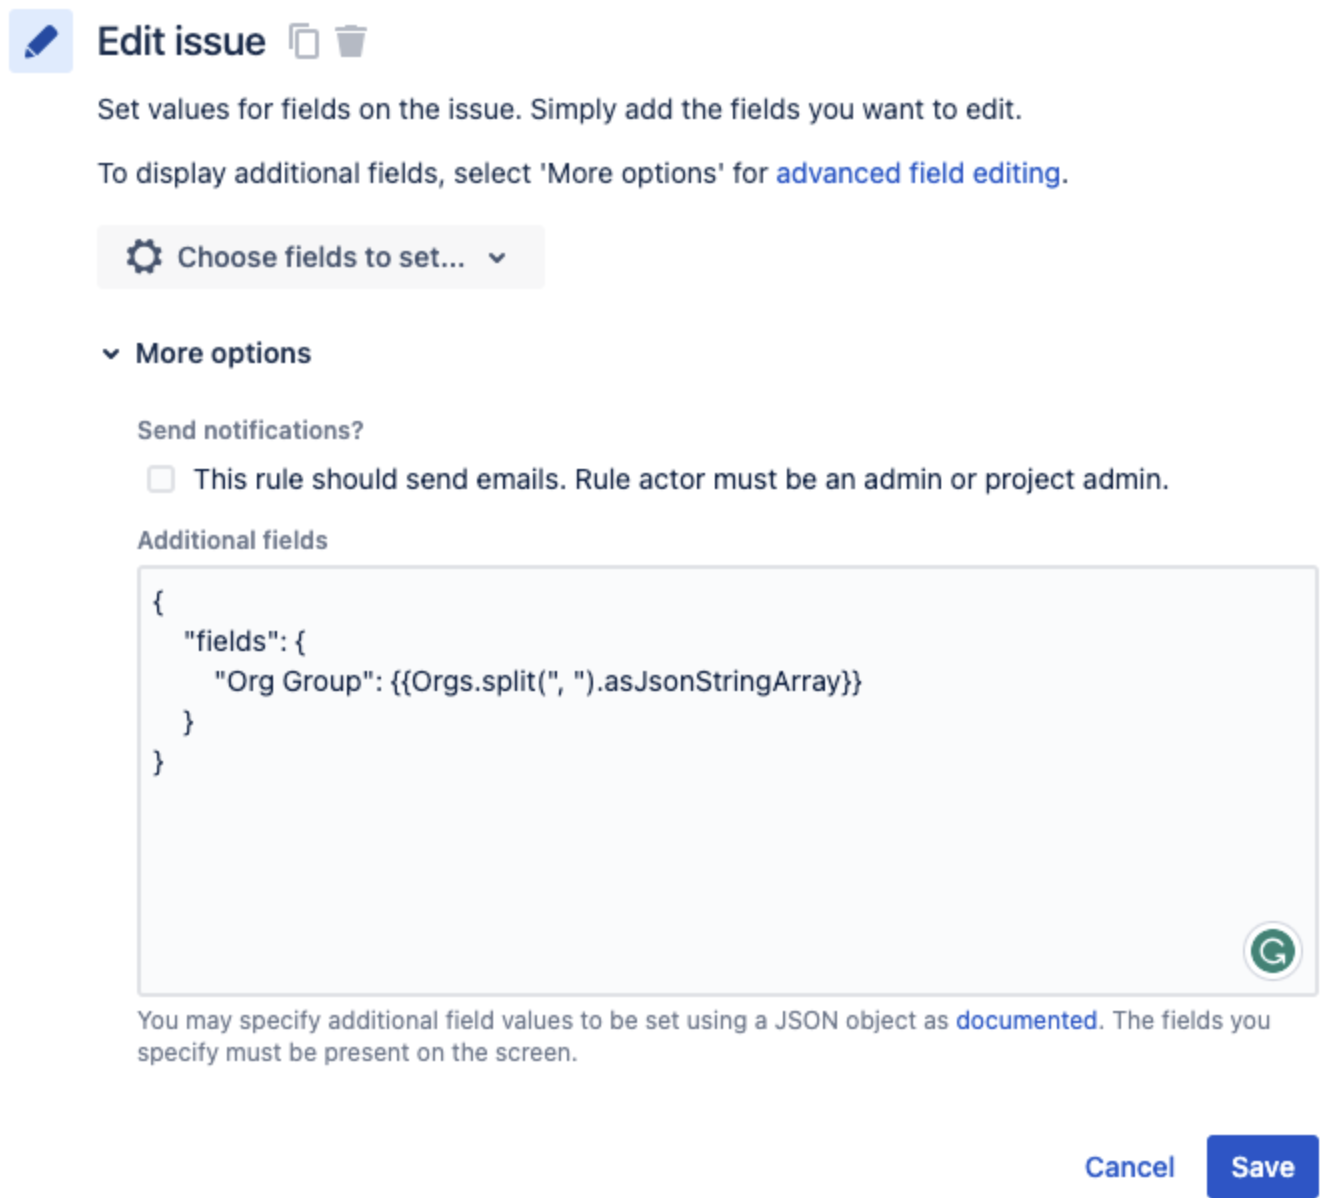 Edit issue component in jira automation using additional fields to set Org group field